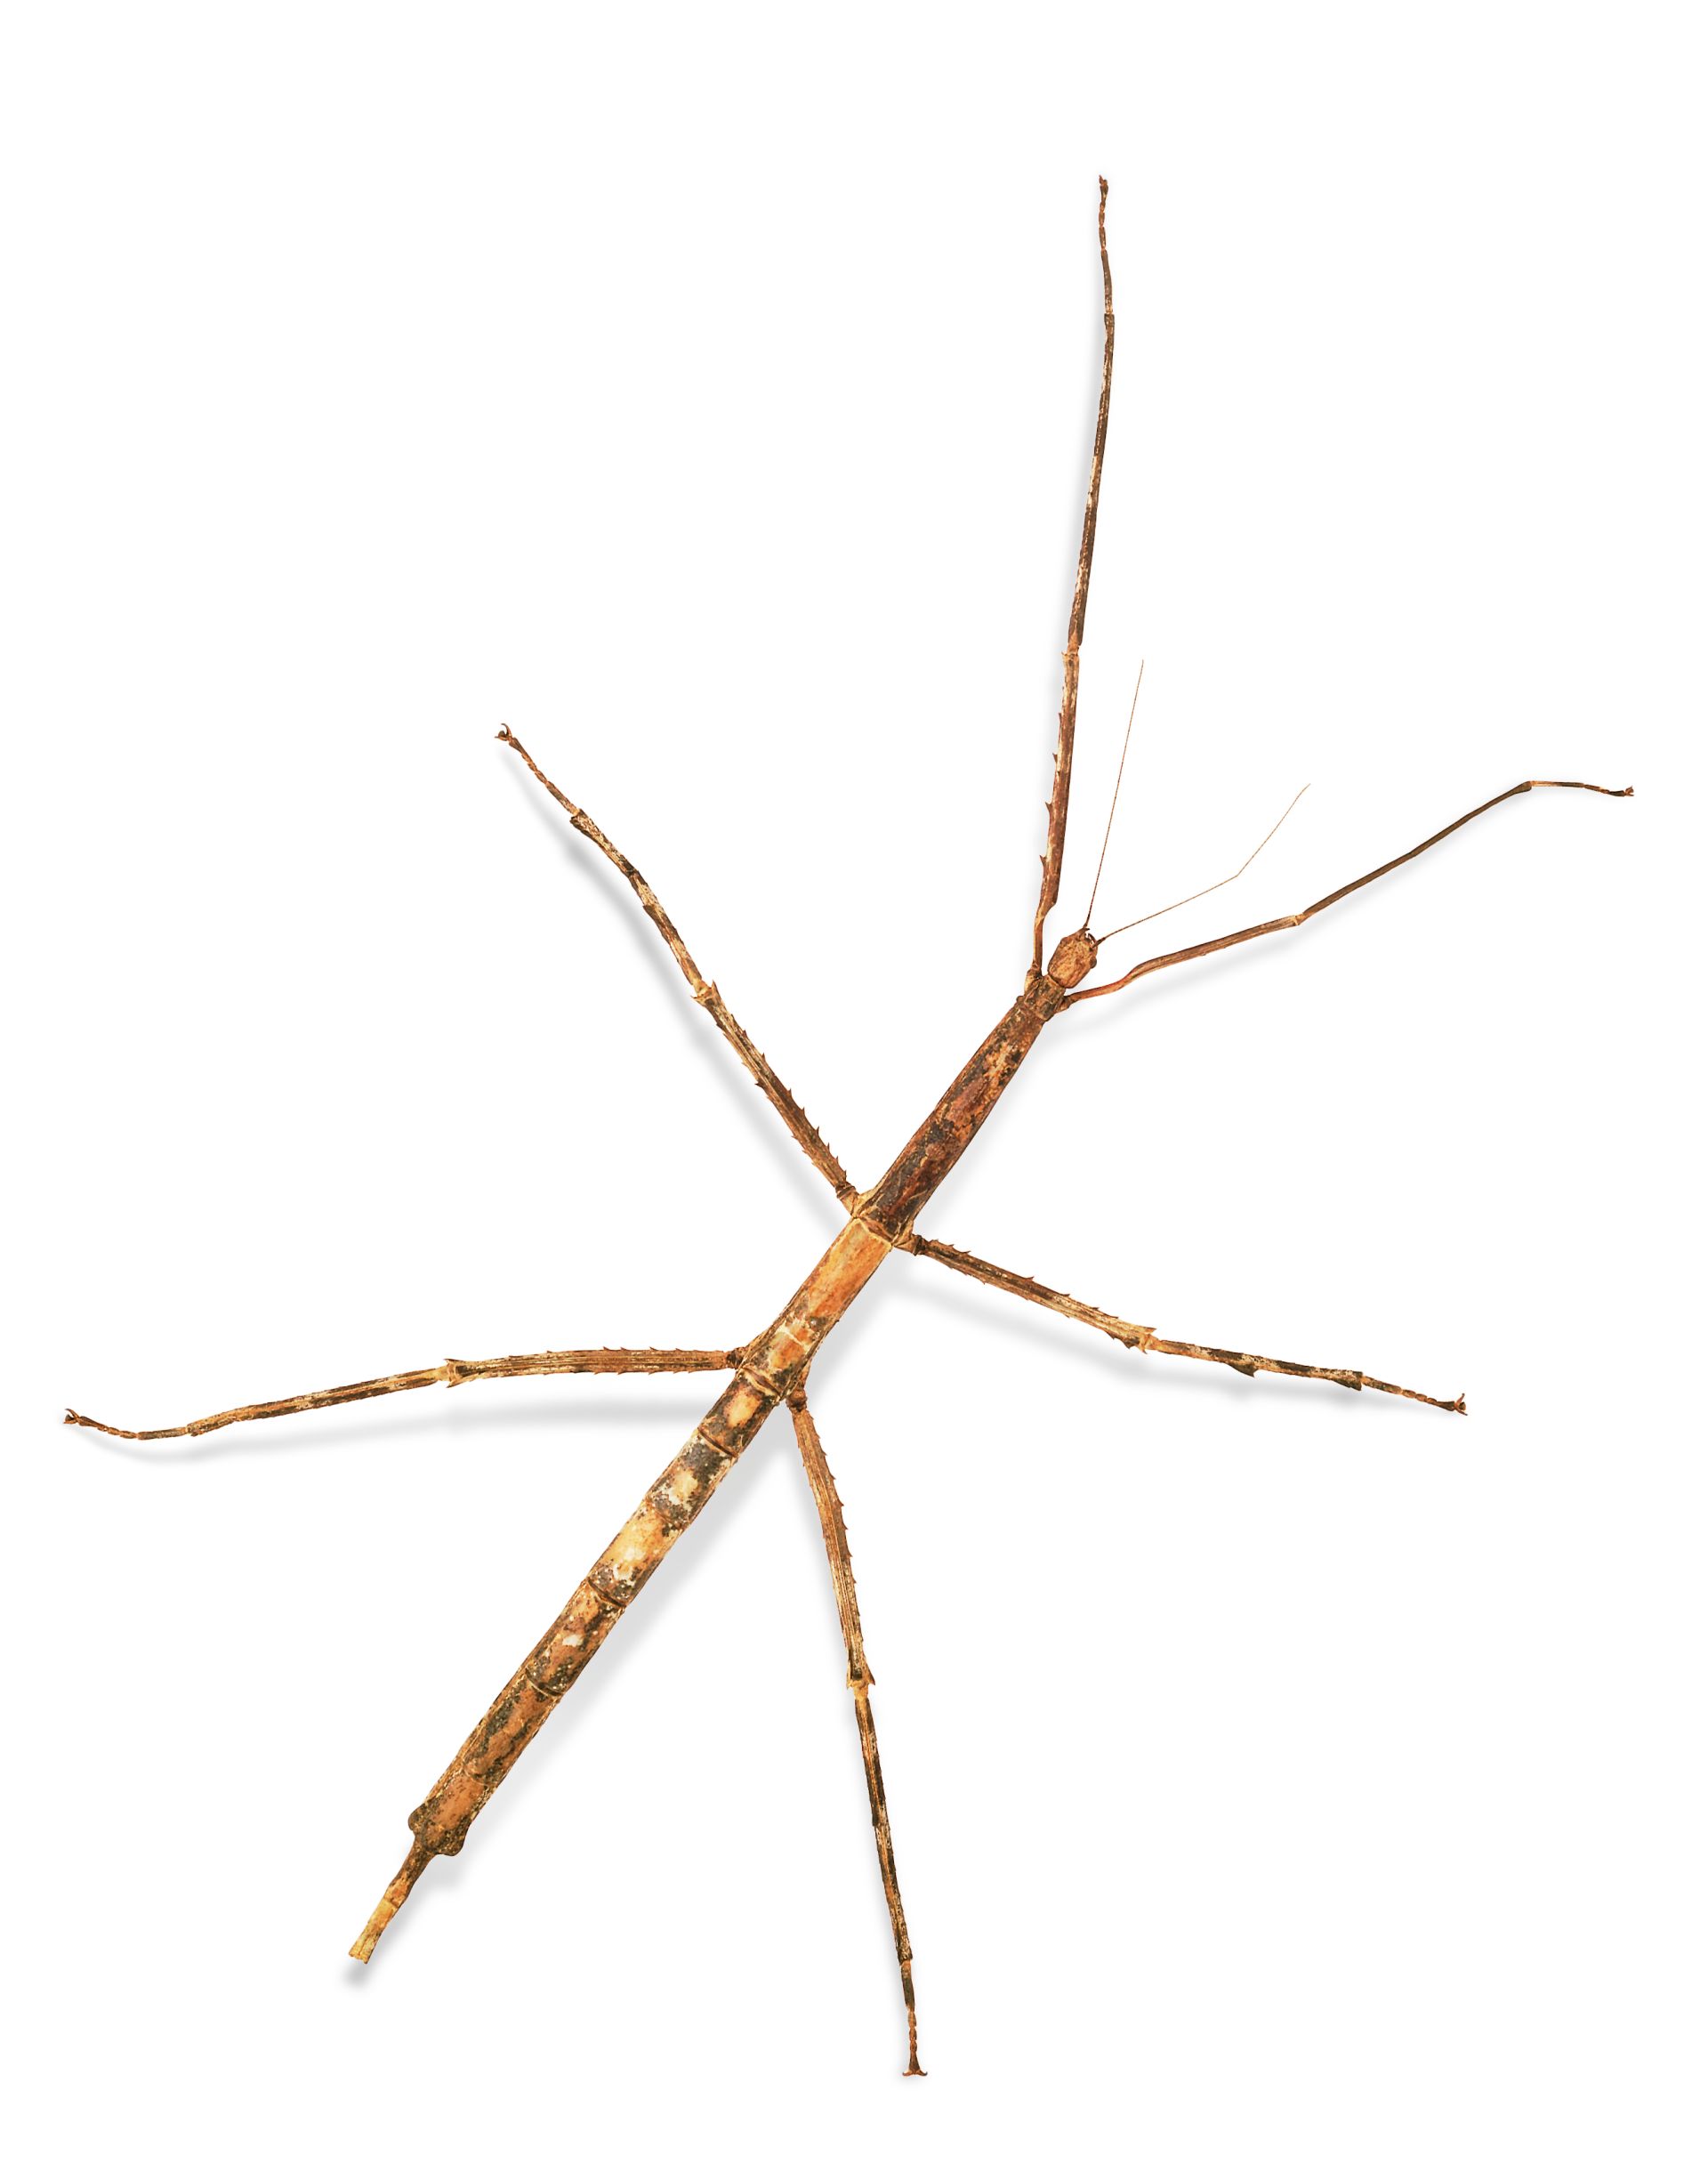 Stick Insect Facts | Stick Insects For Kids | DK Find Out